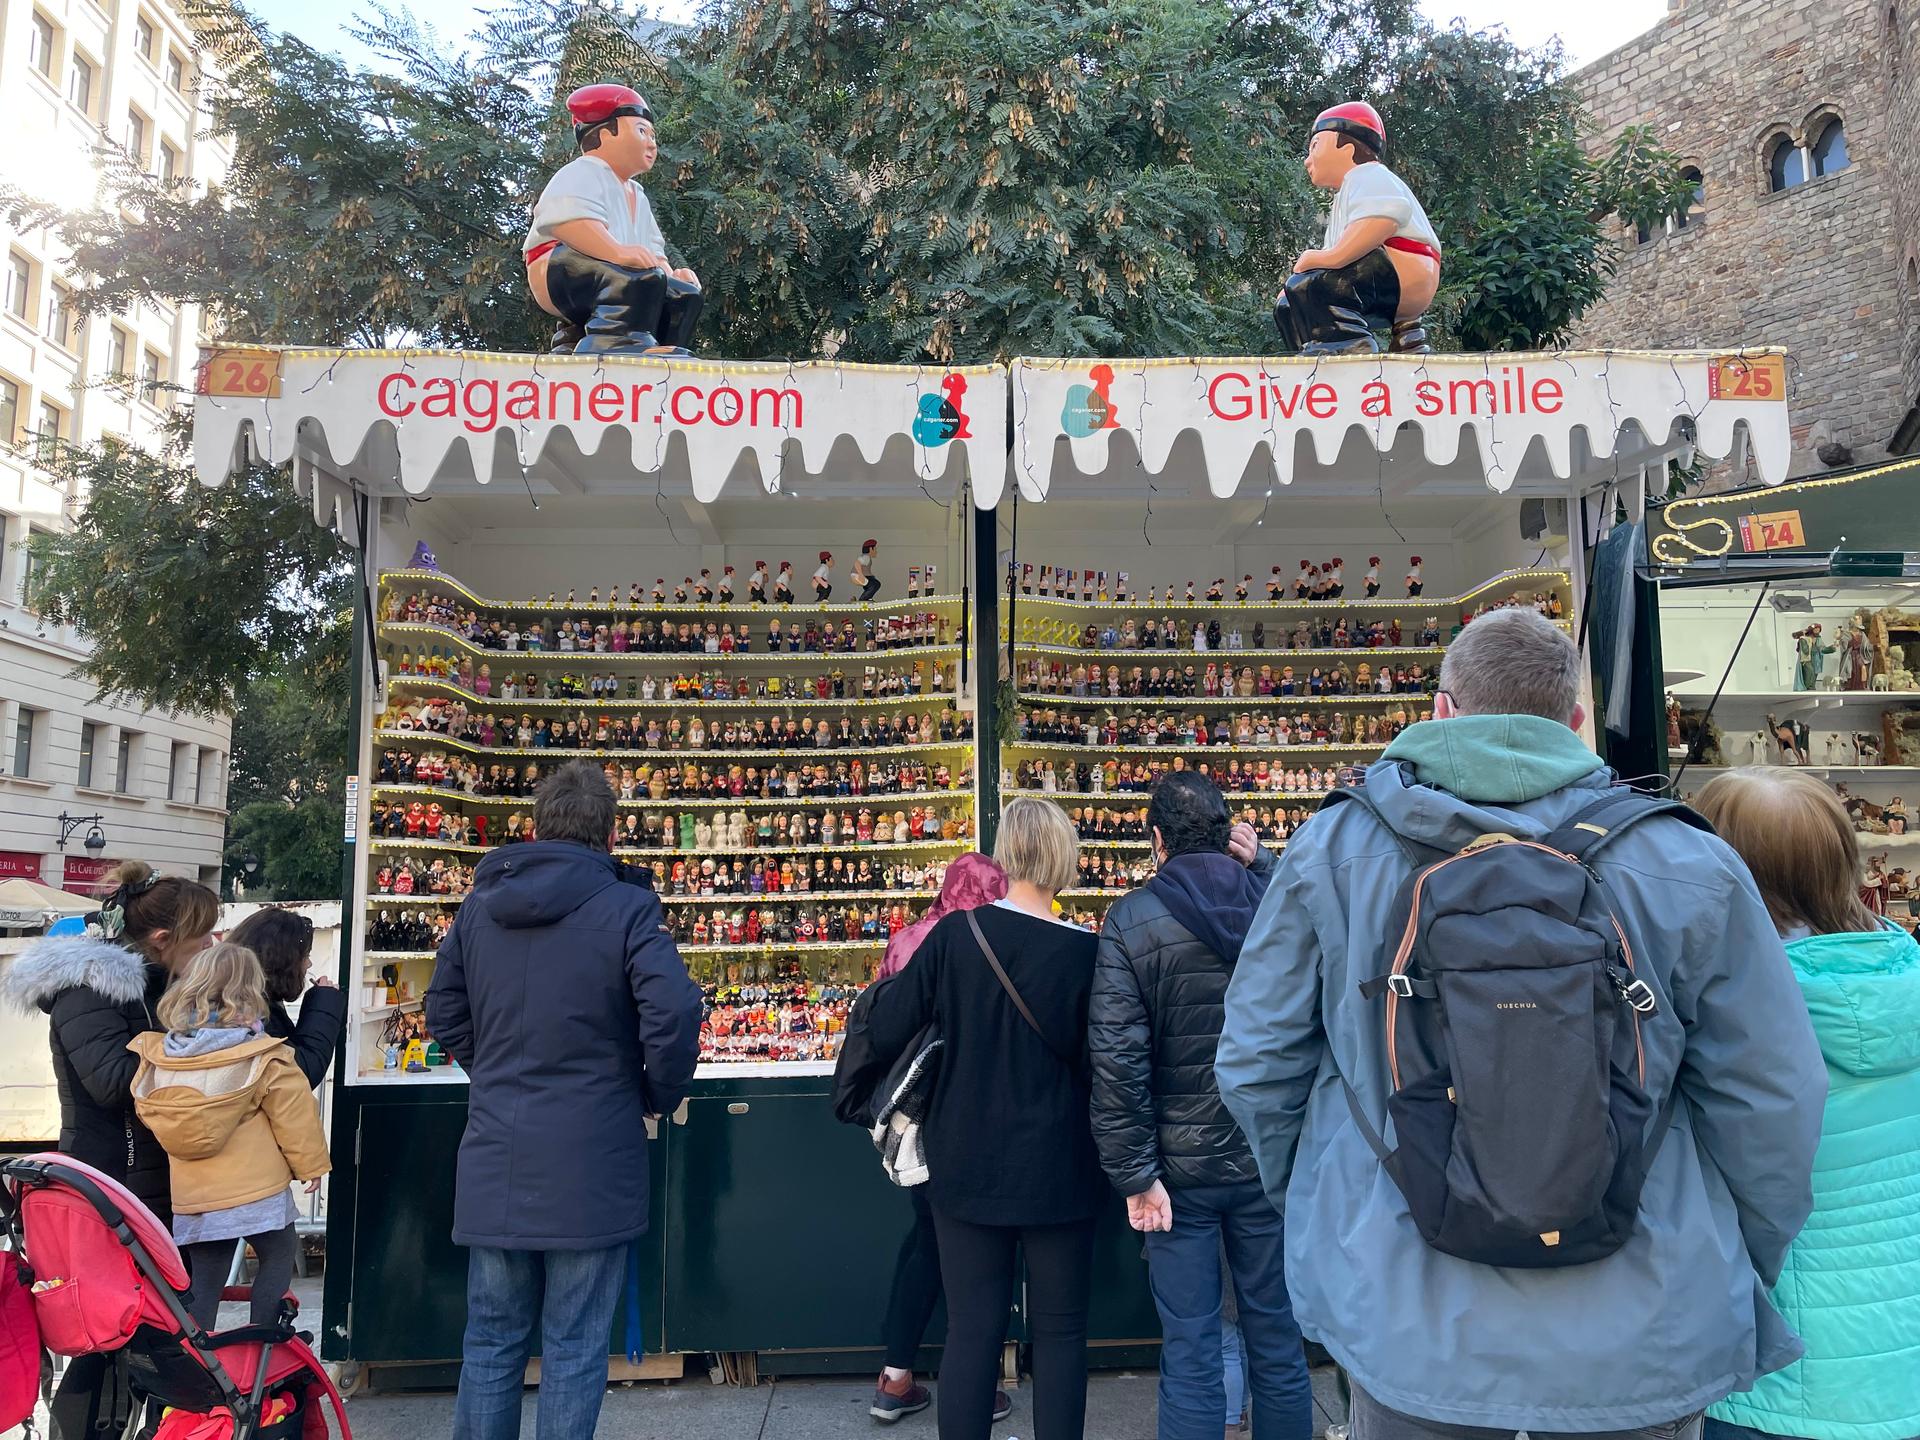 At Barcelona's oldest Christmas market, Fira de Santa Llúcia, Marc Alós sells handmade Caganers. His company, founded by his mother in 1992, now has more than 500 versions of the Caganer.